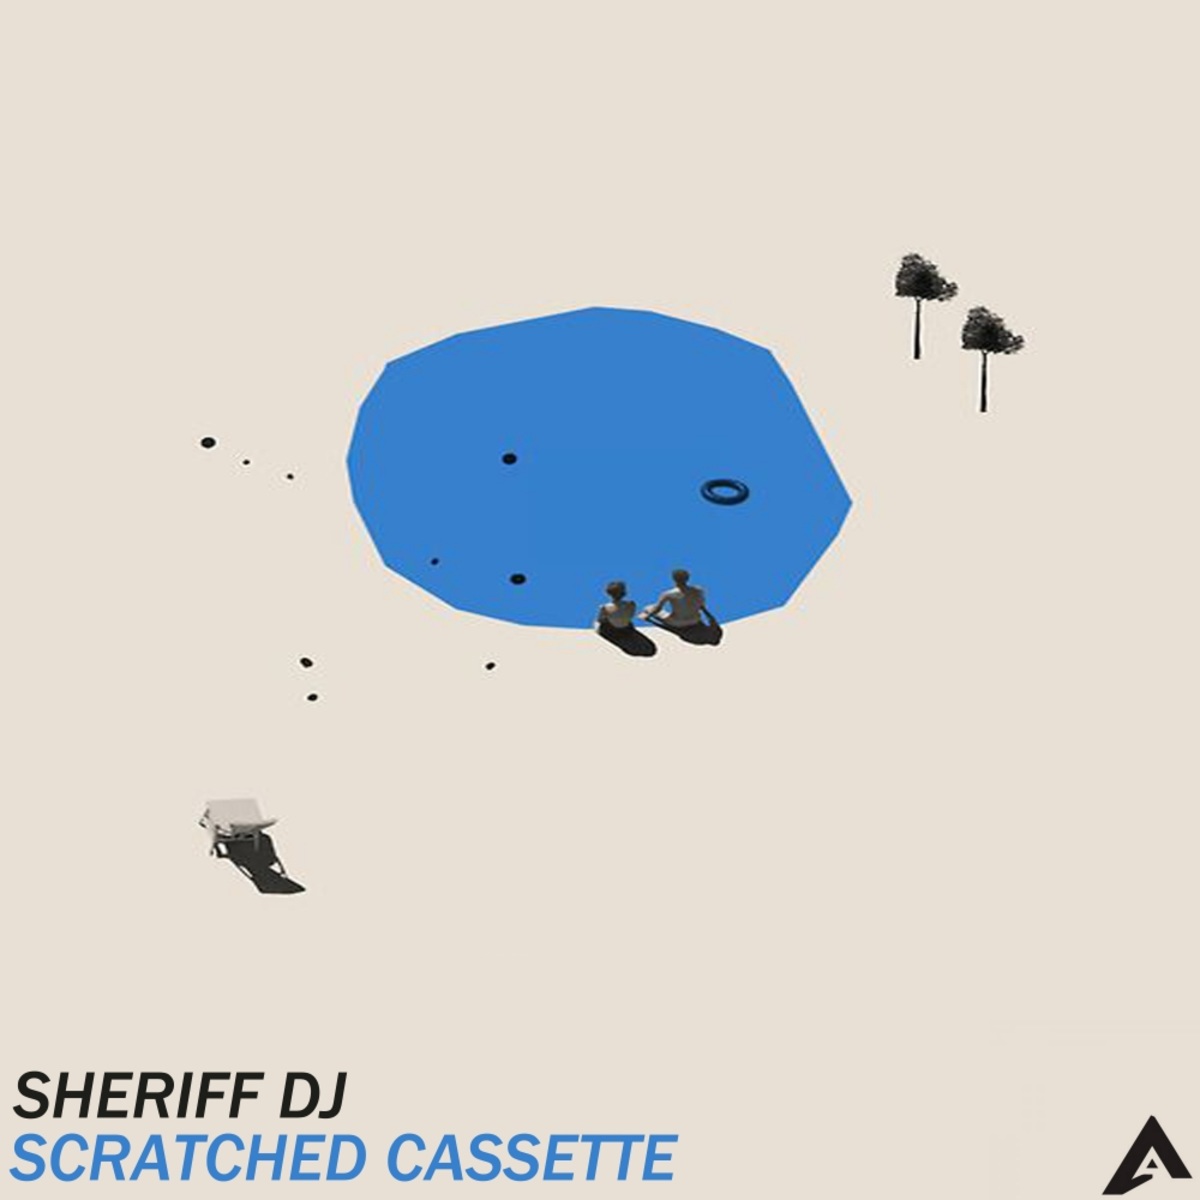 Sheriff Dj - Scratched Cassette / AfroMove Music